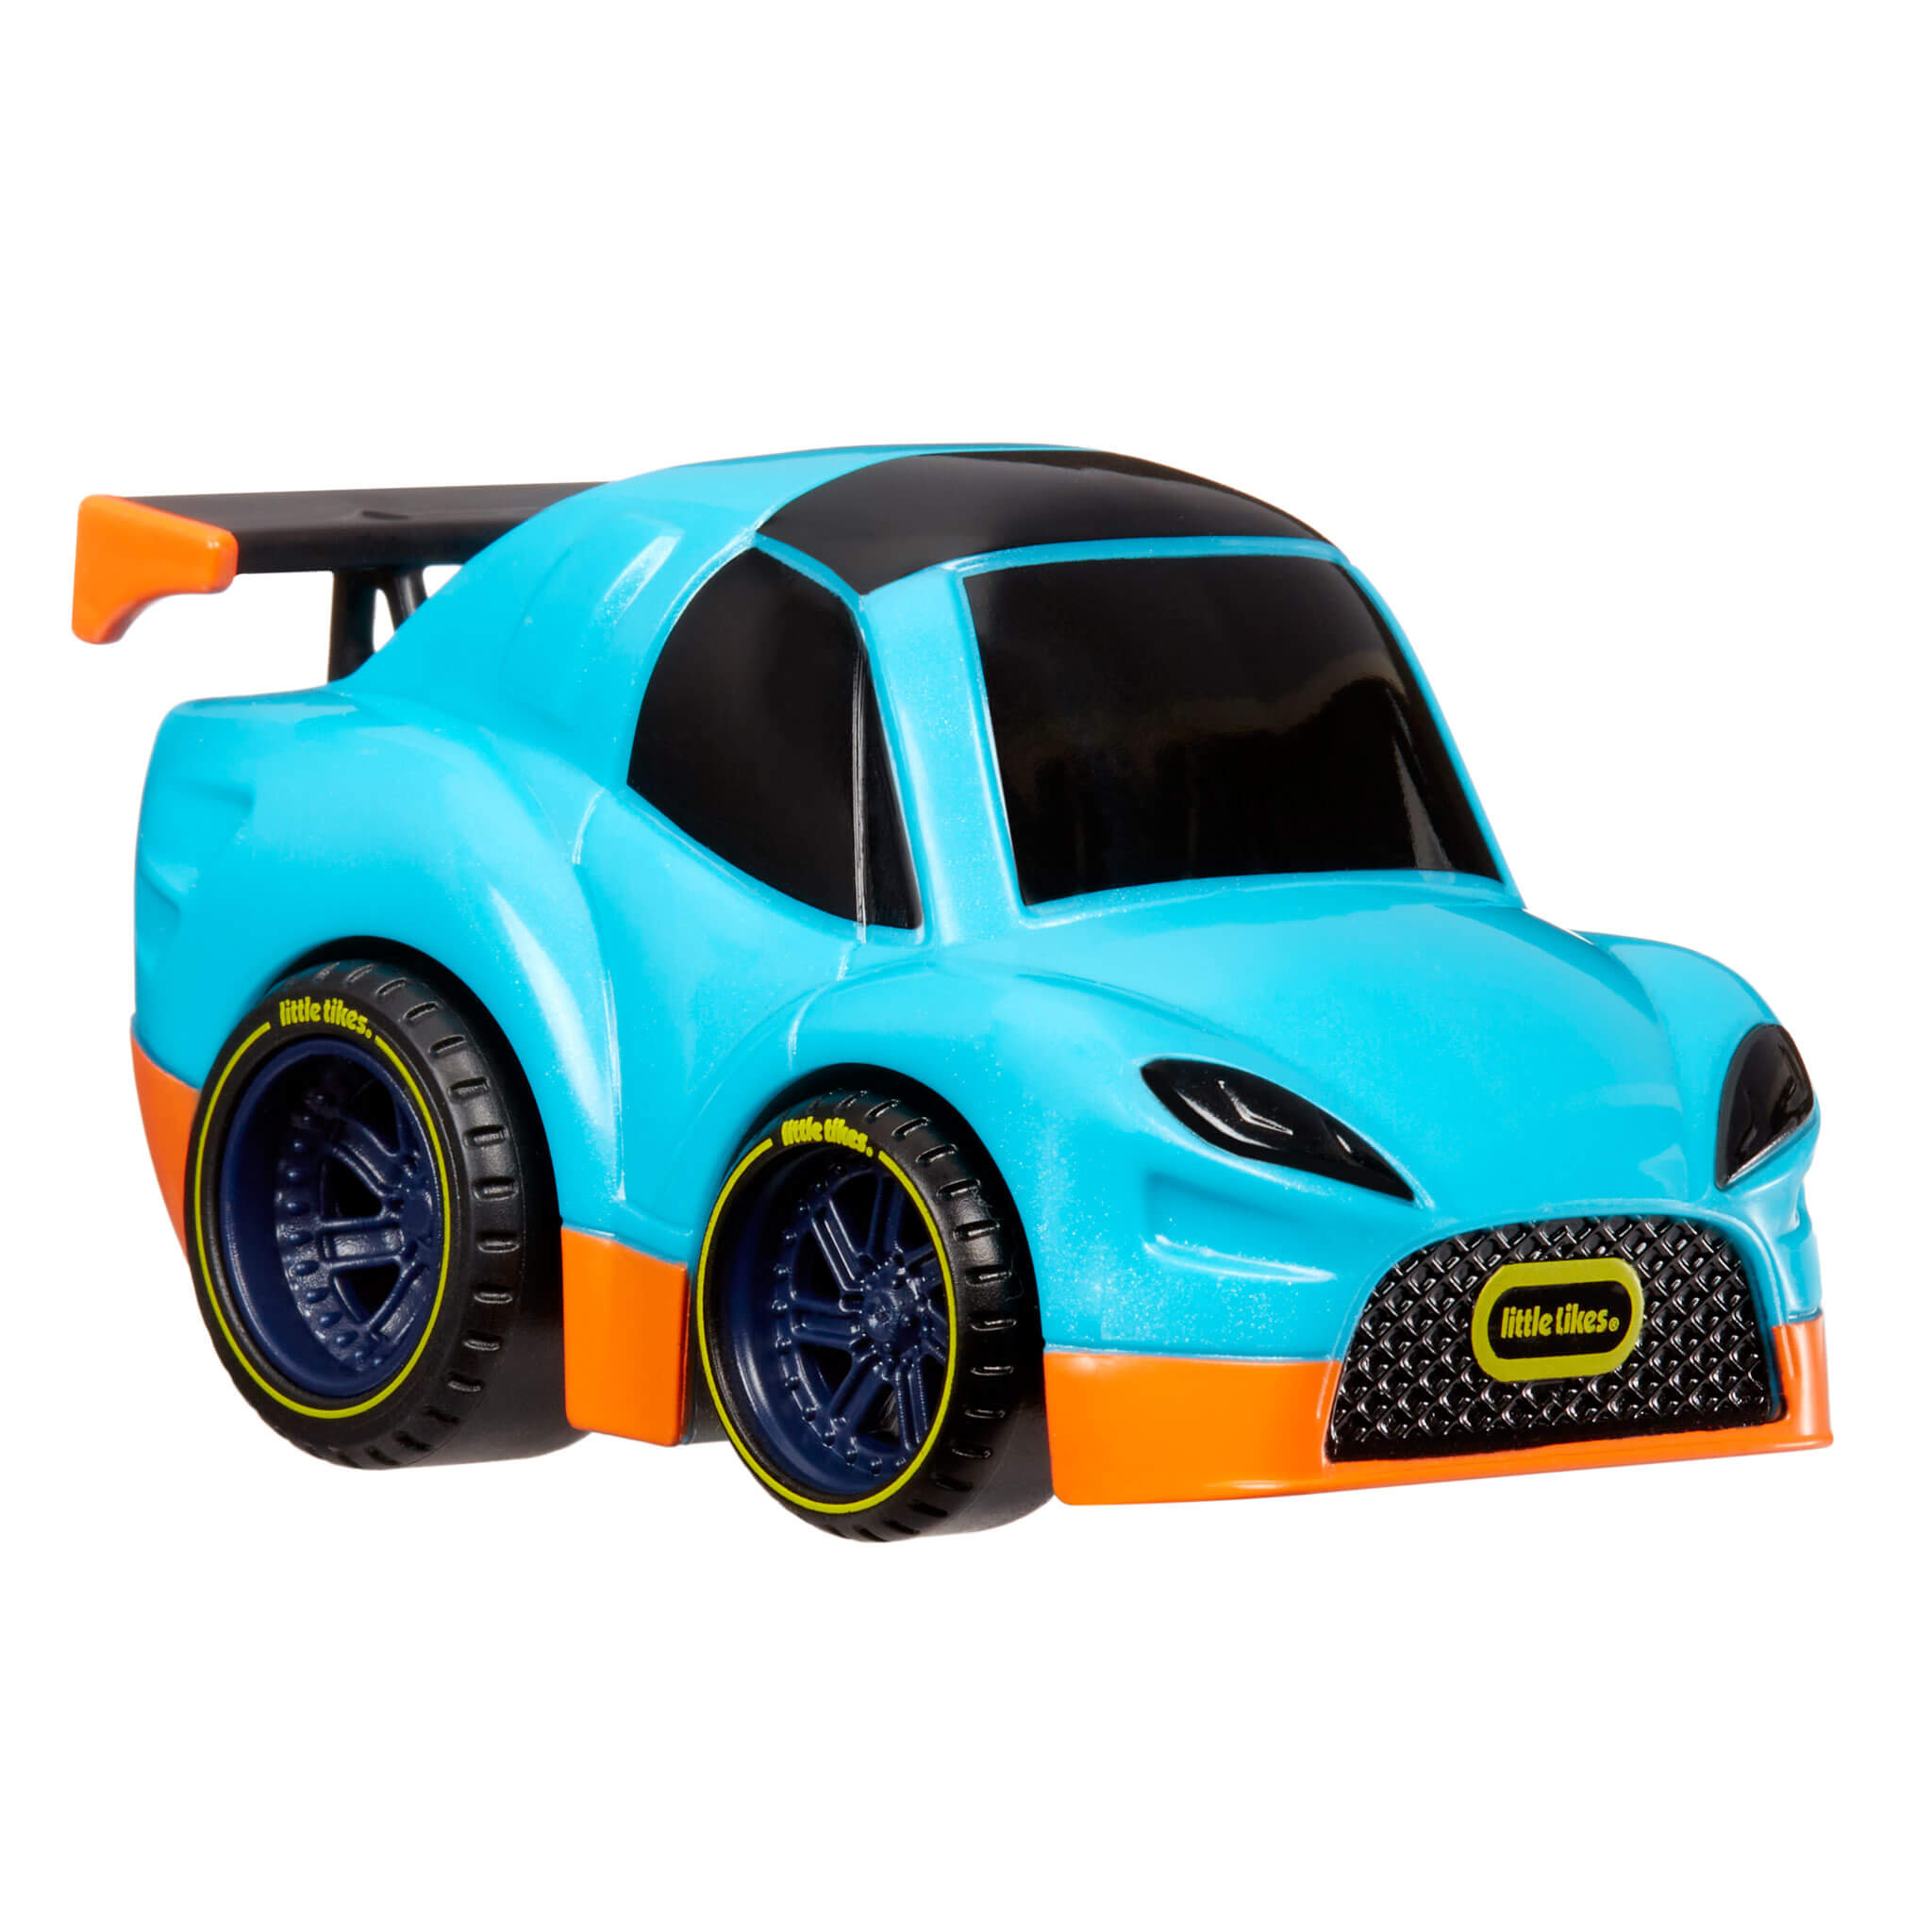 Crazy Fast Cars 2 Pack Series 3 - Off-Roaders – Official Little Tikes  Website